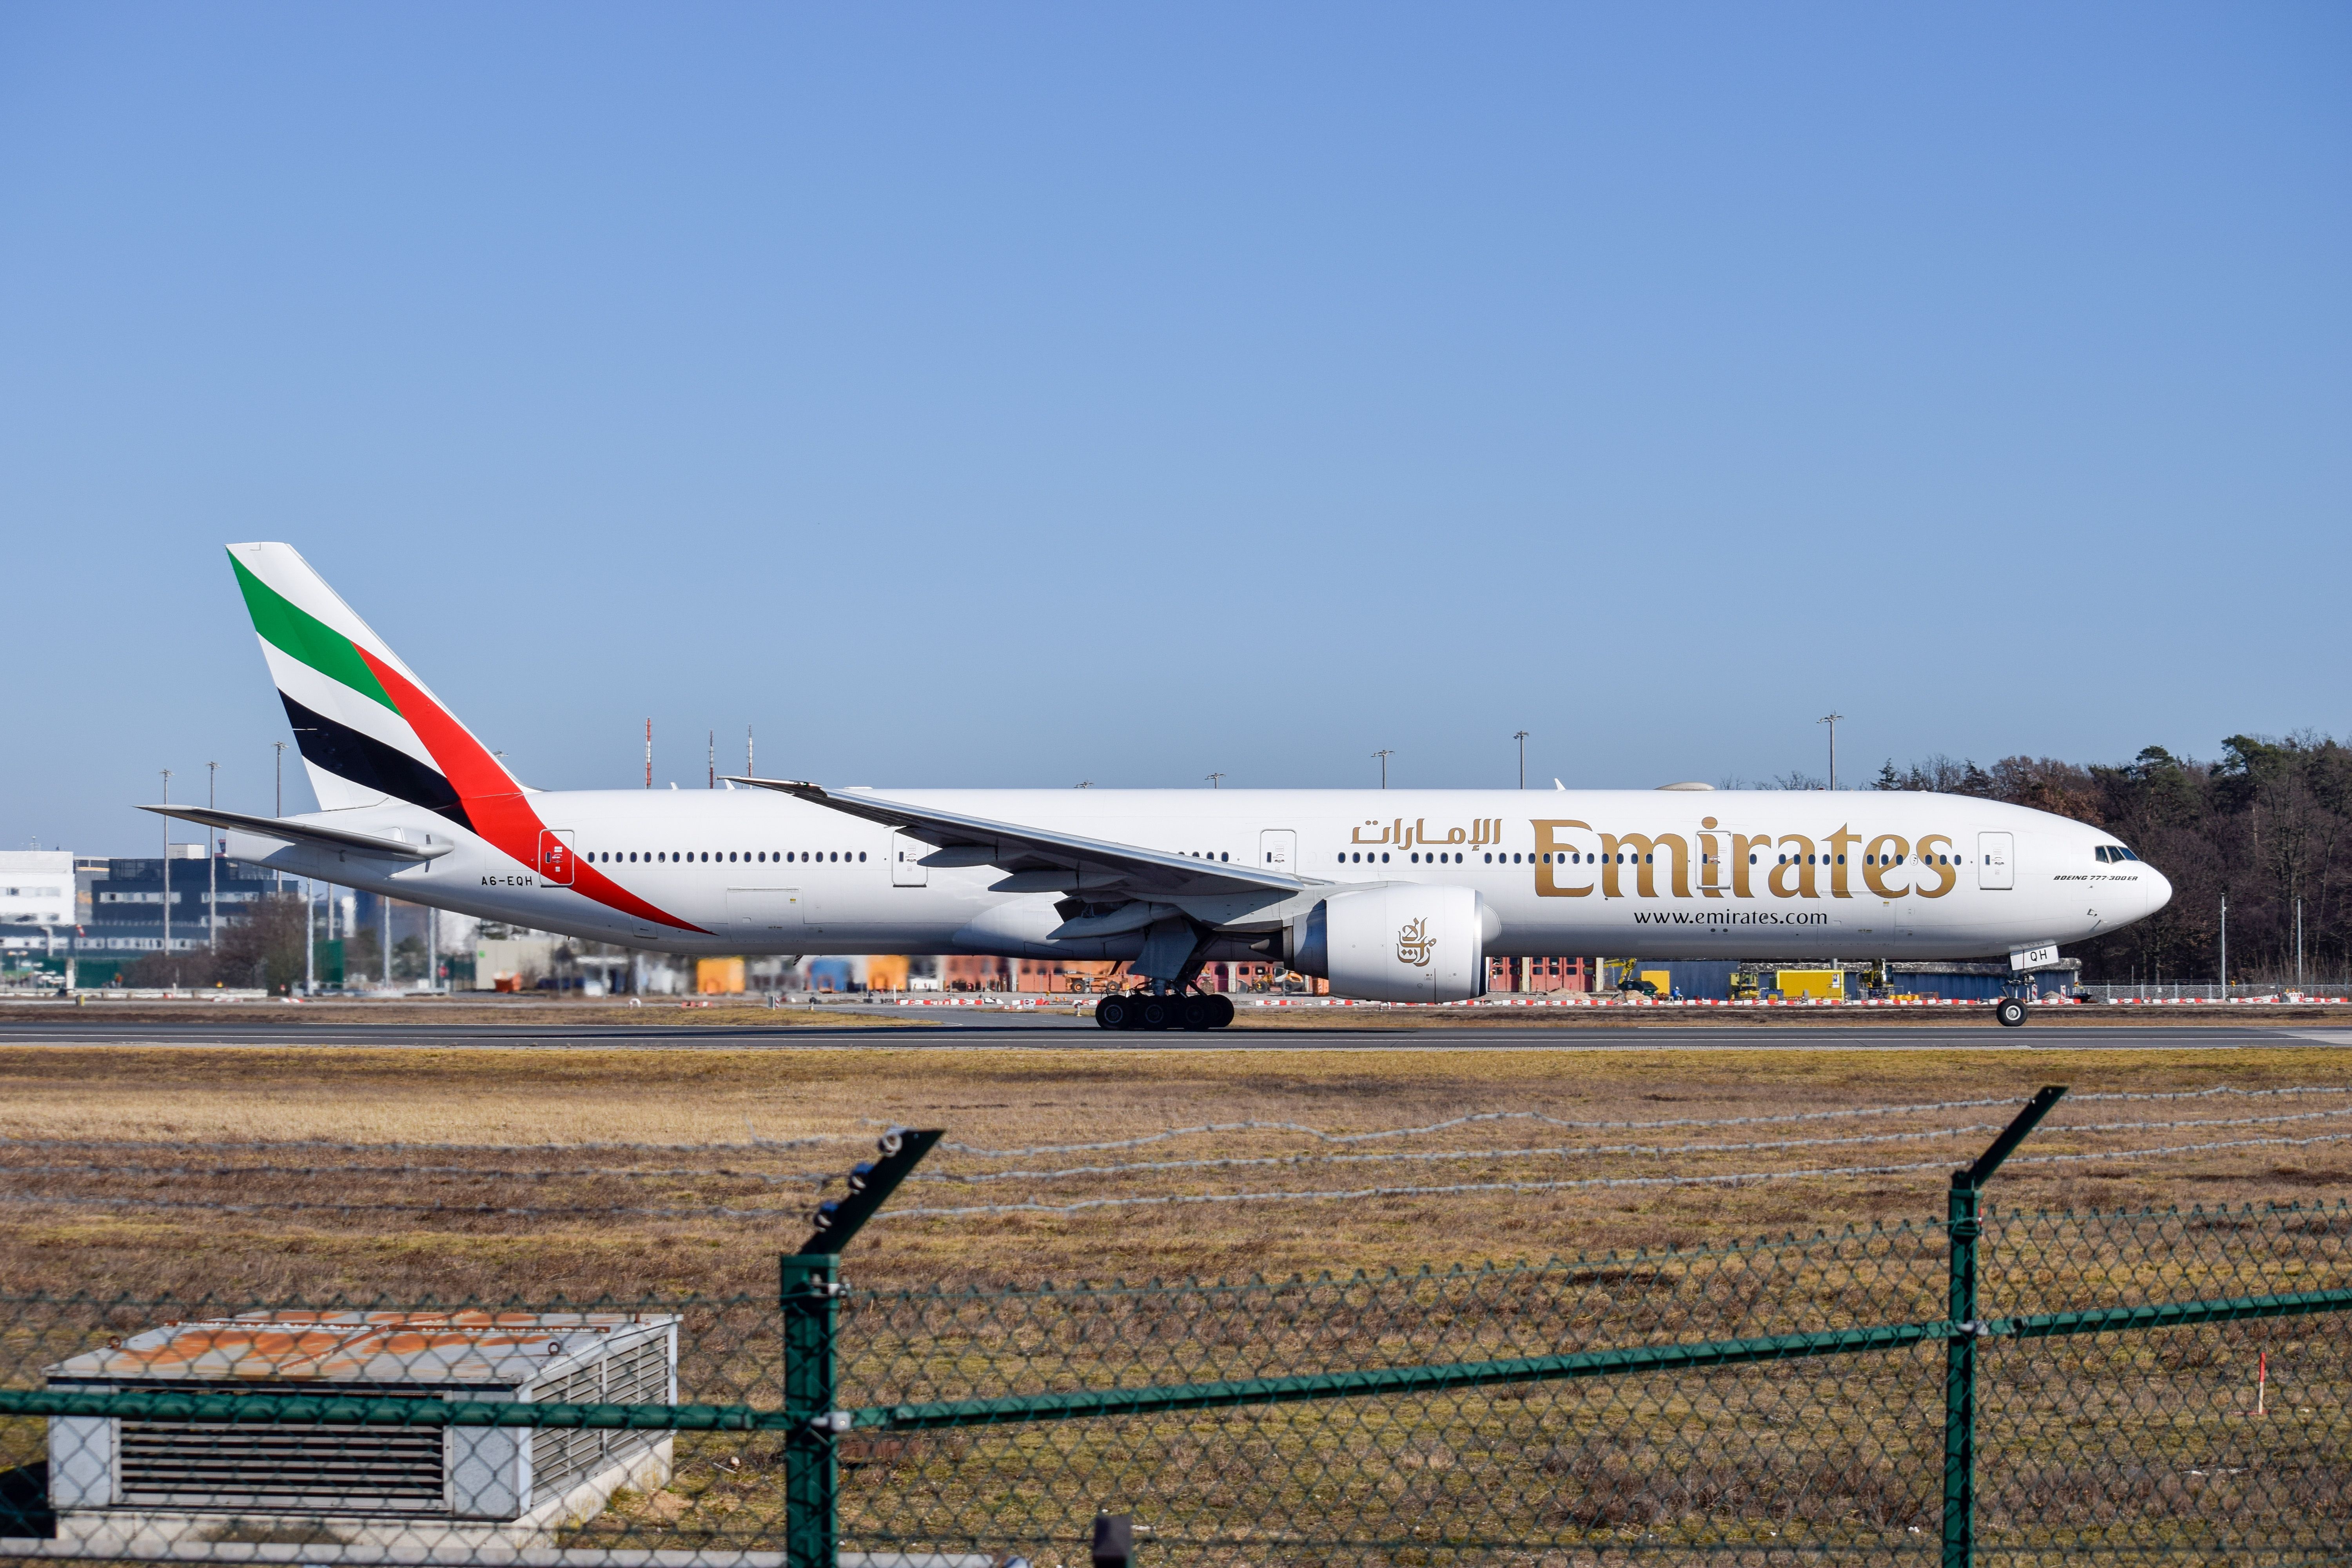 Emirates Boeing 777 taxiing